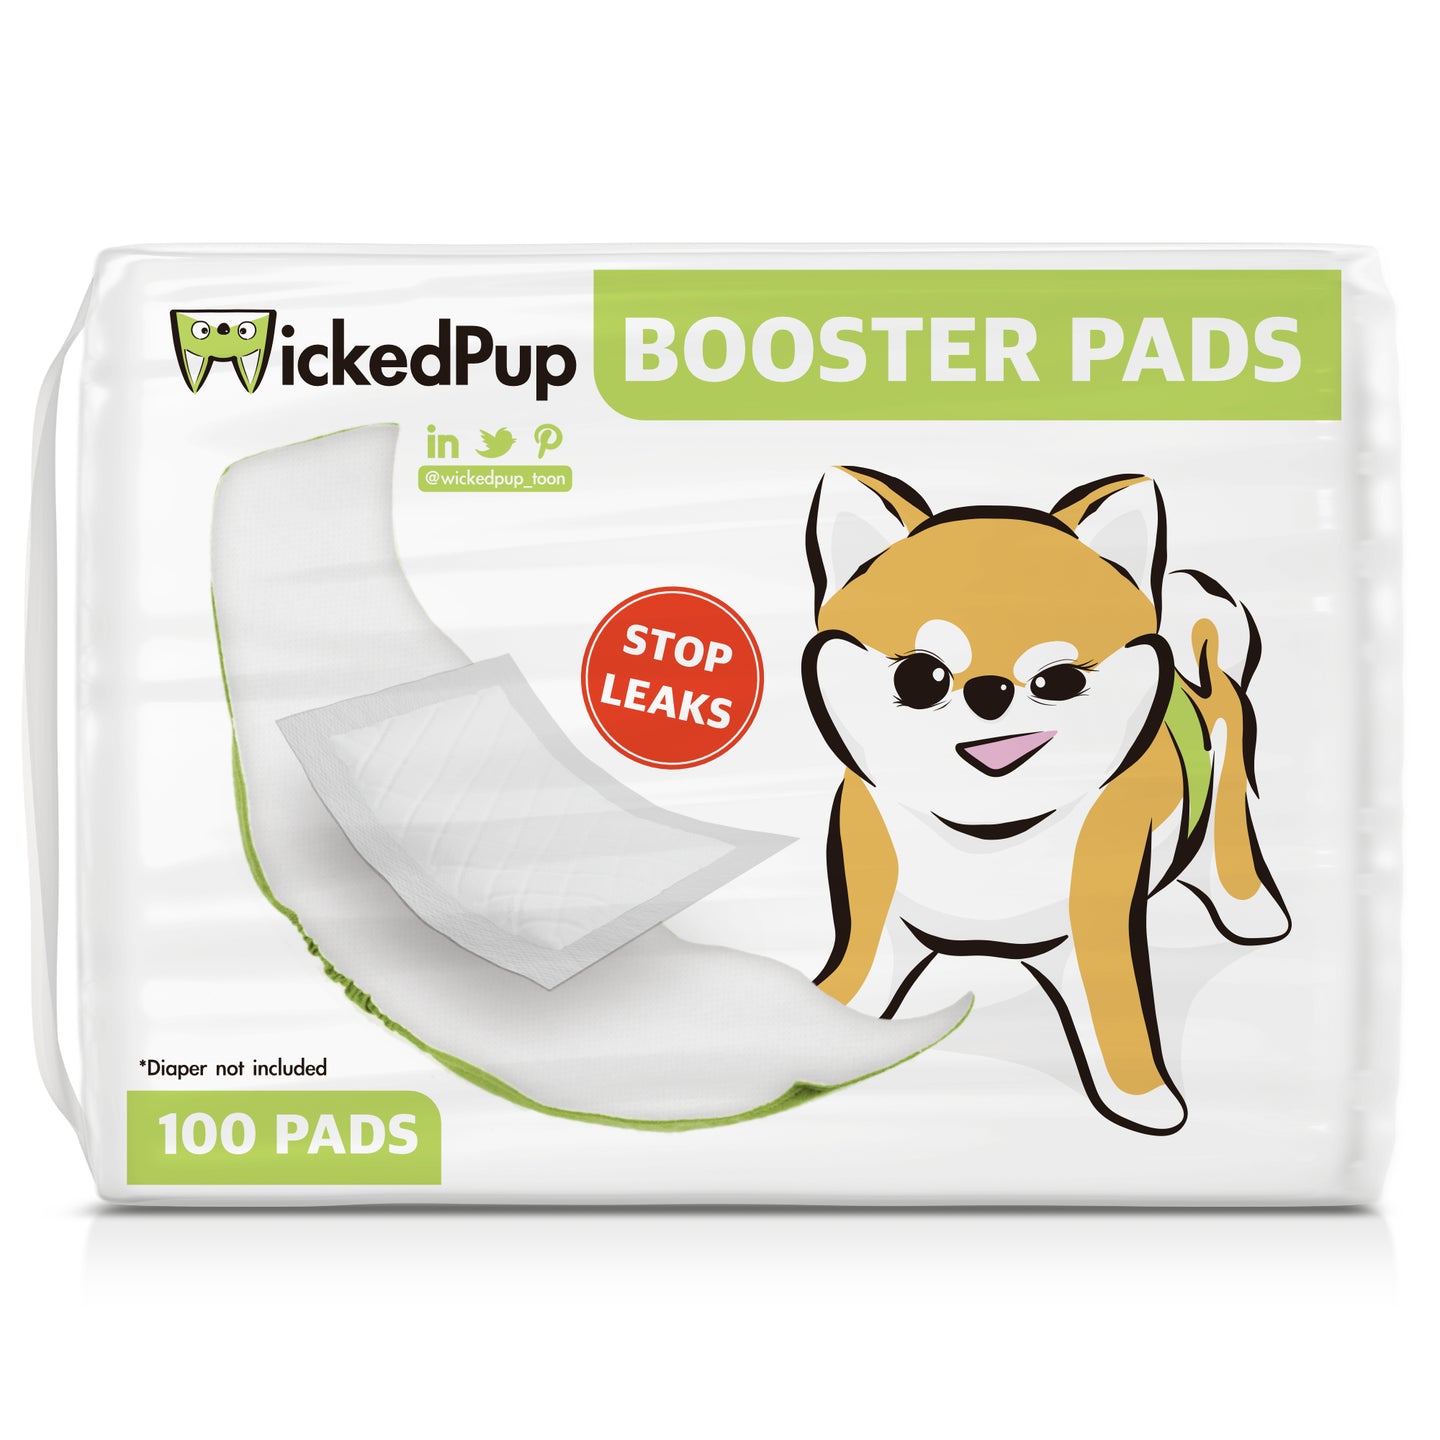 WickedPup Booster Pads for Dog Diapers & Wraps